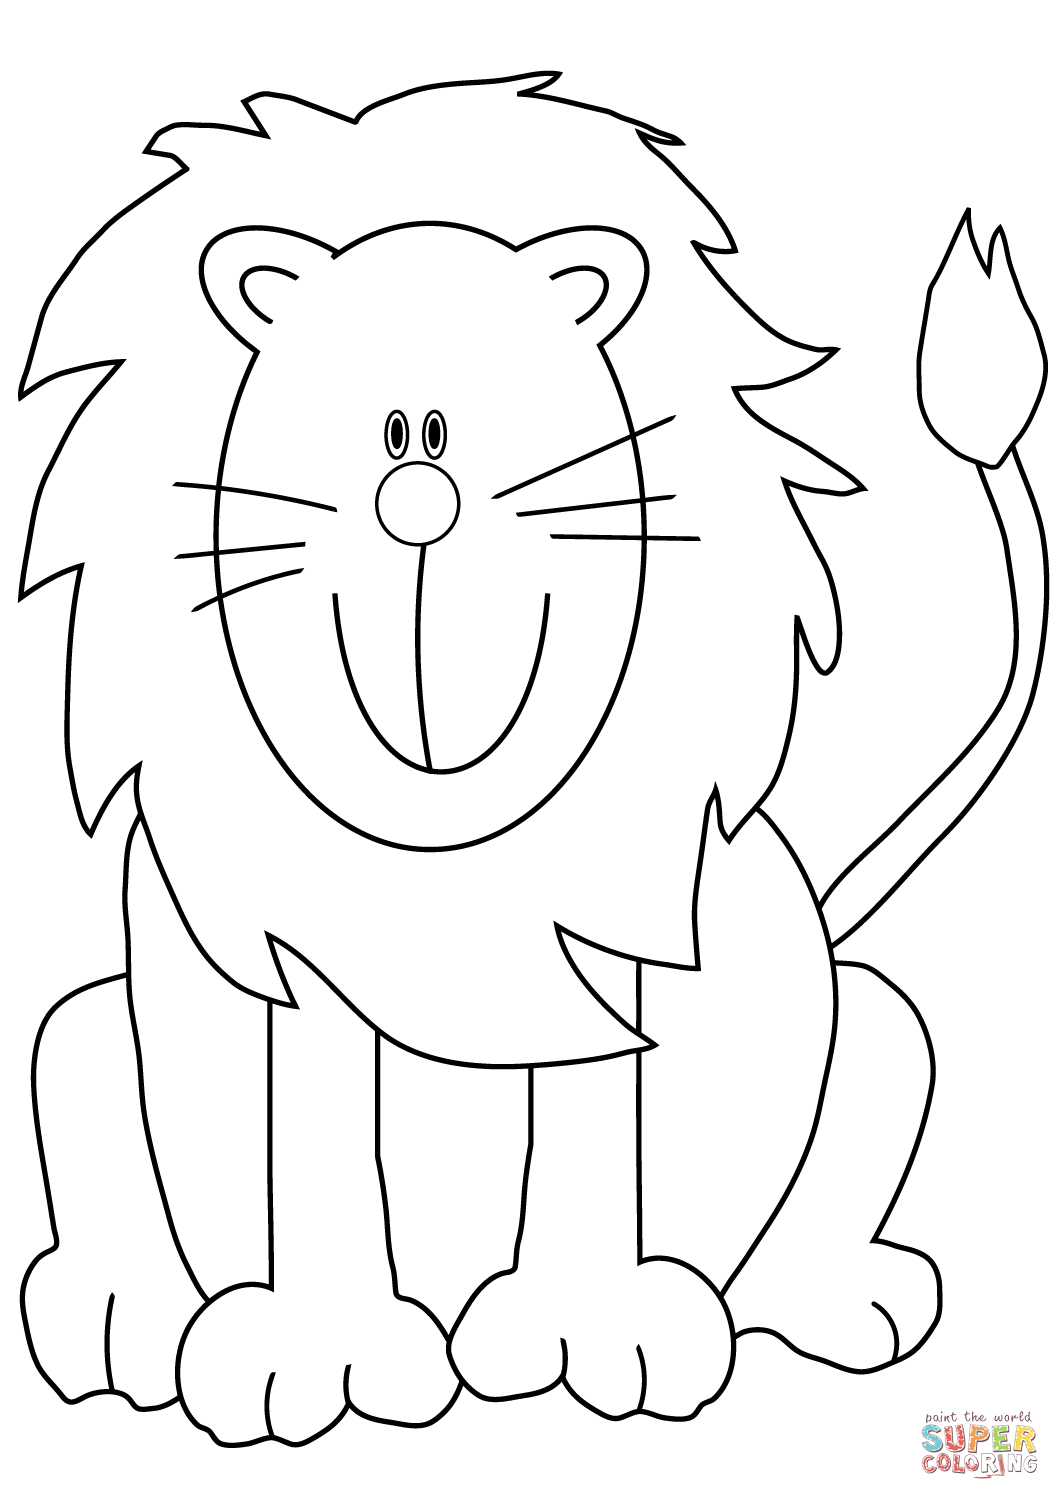 Lovely cartoon lionloring page free printableloring pages png